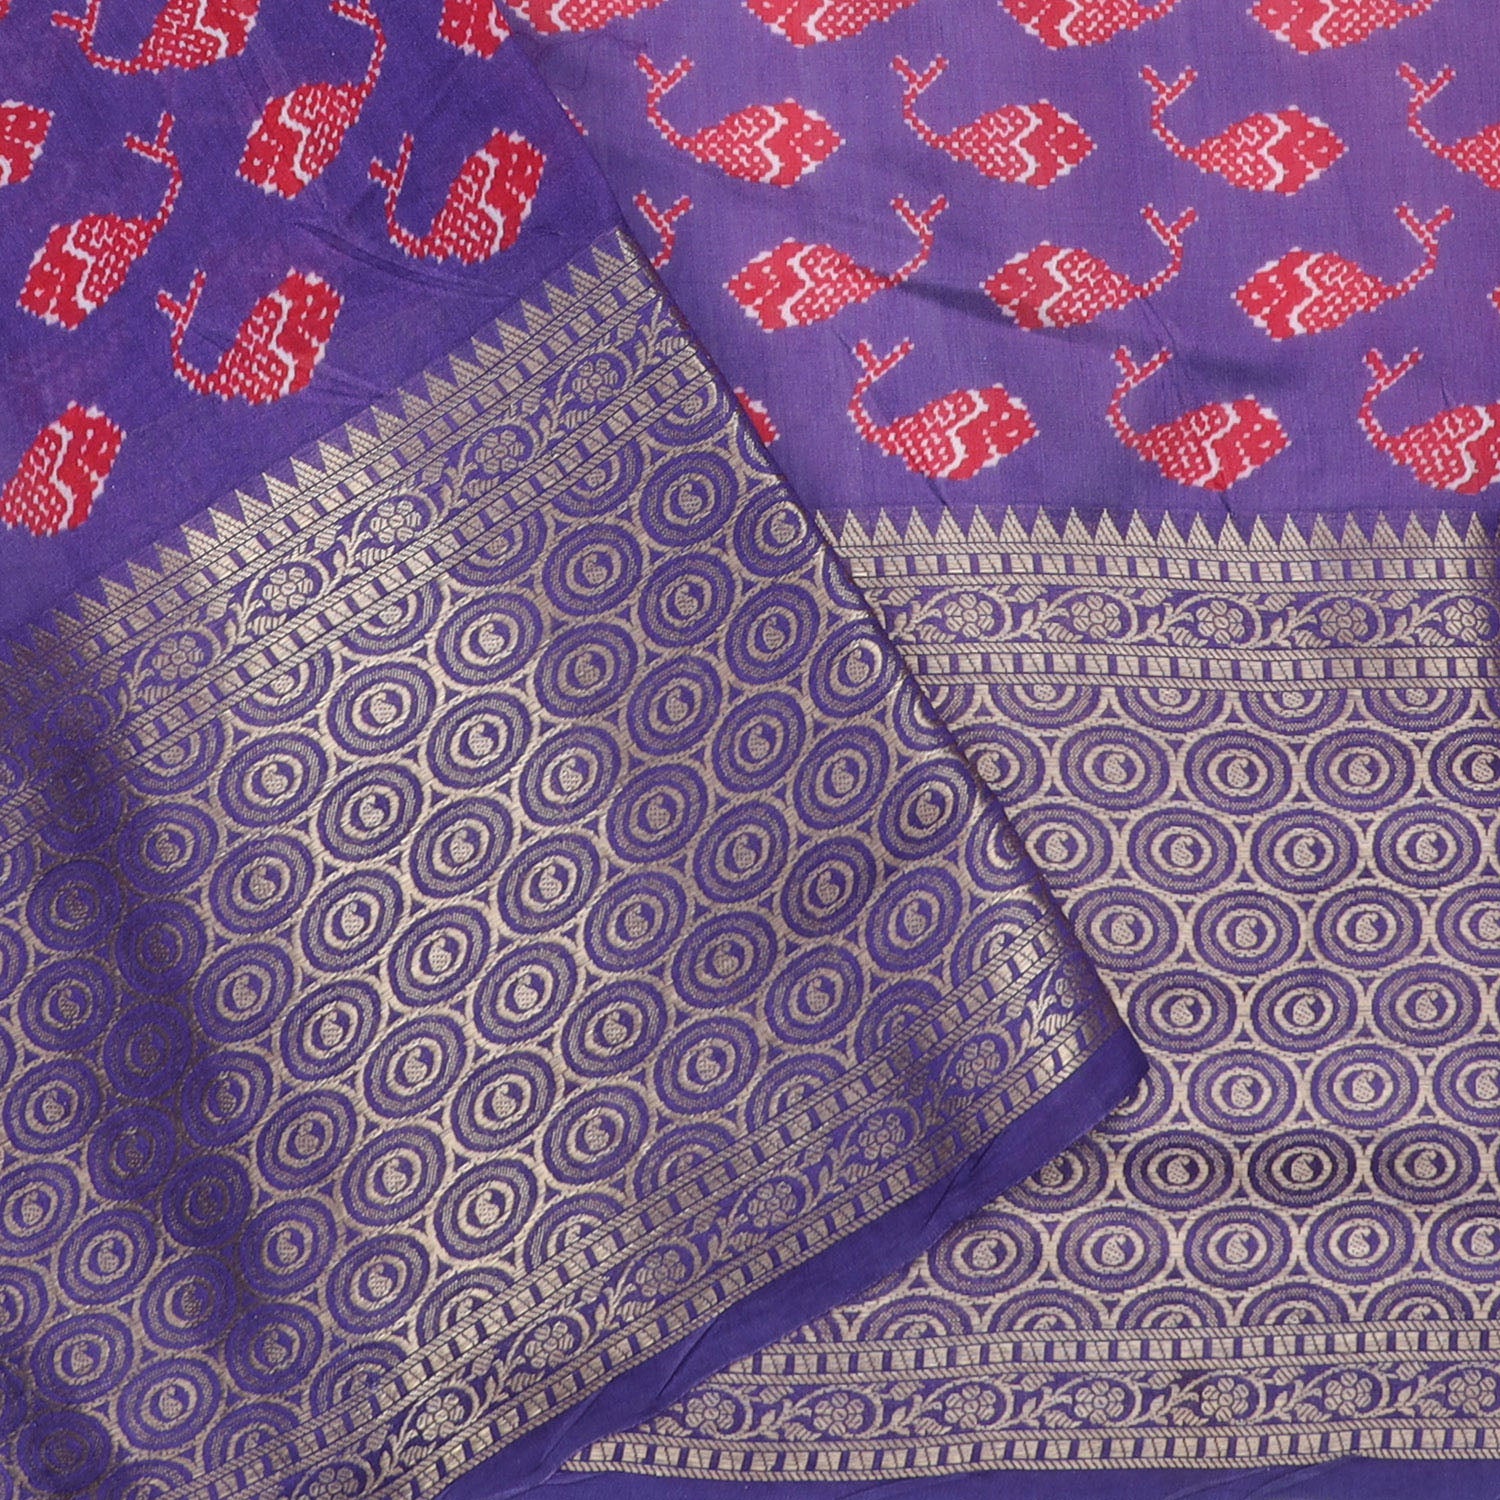 Brick Red Cotton Saree With Printed Pattern - Singhania's